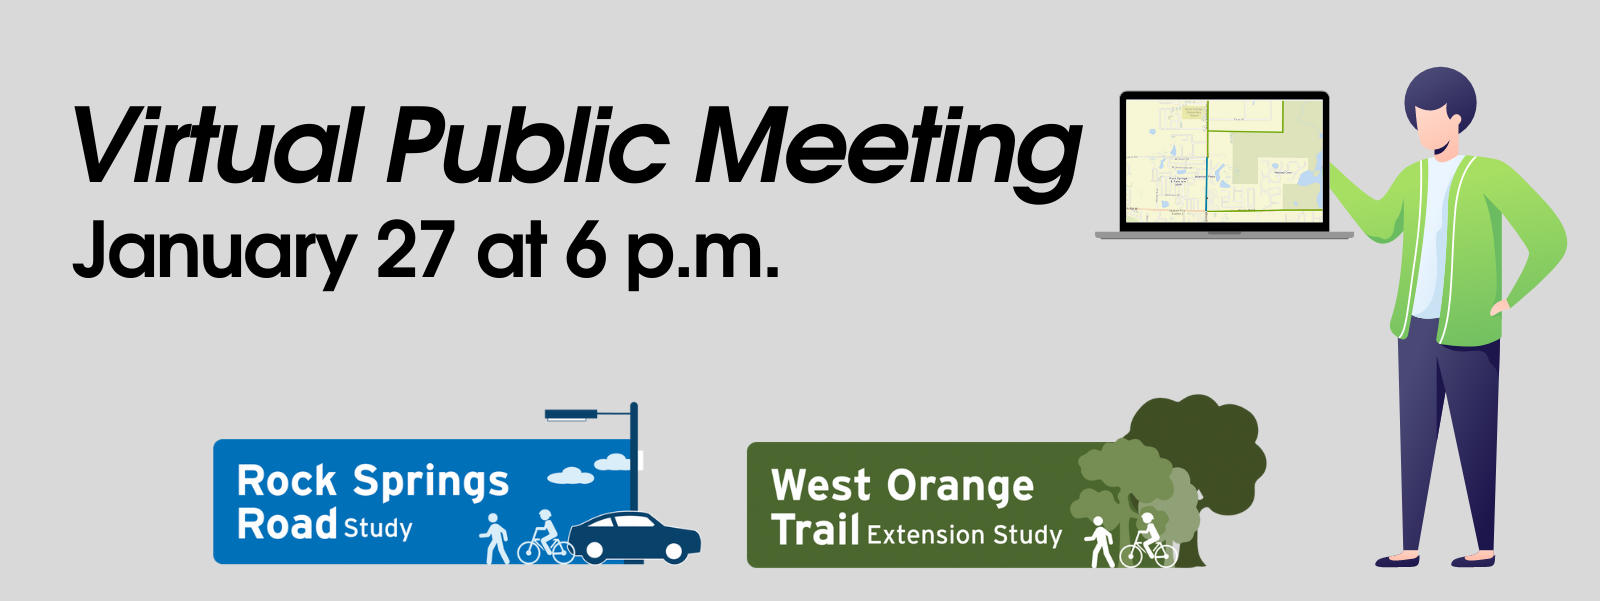 Virtual Public Meeting on January 27, 2022 at 6 p.m. - Rock Springs Road Study and West Orange Trail Extension Study